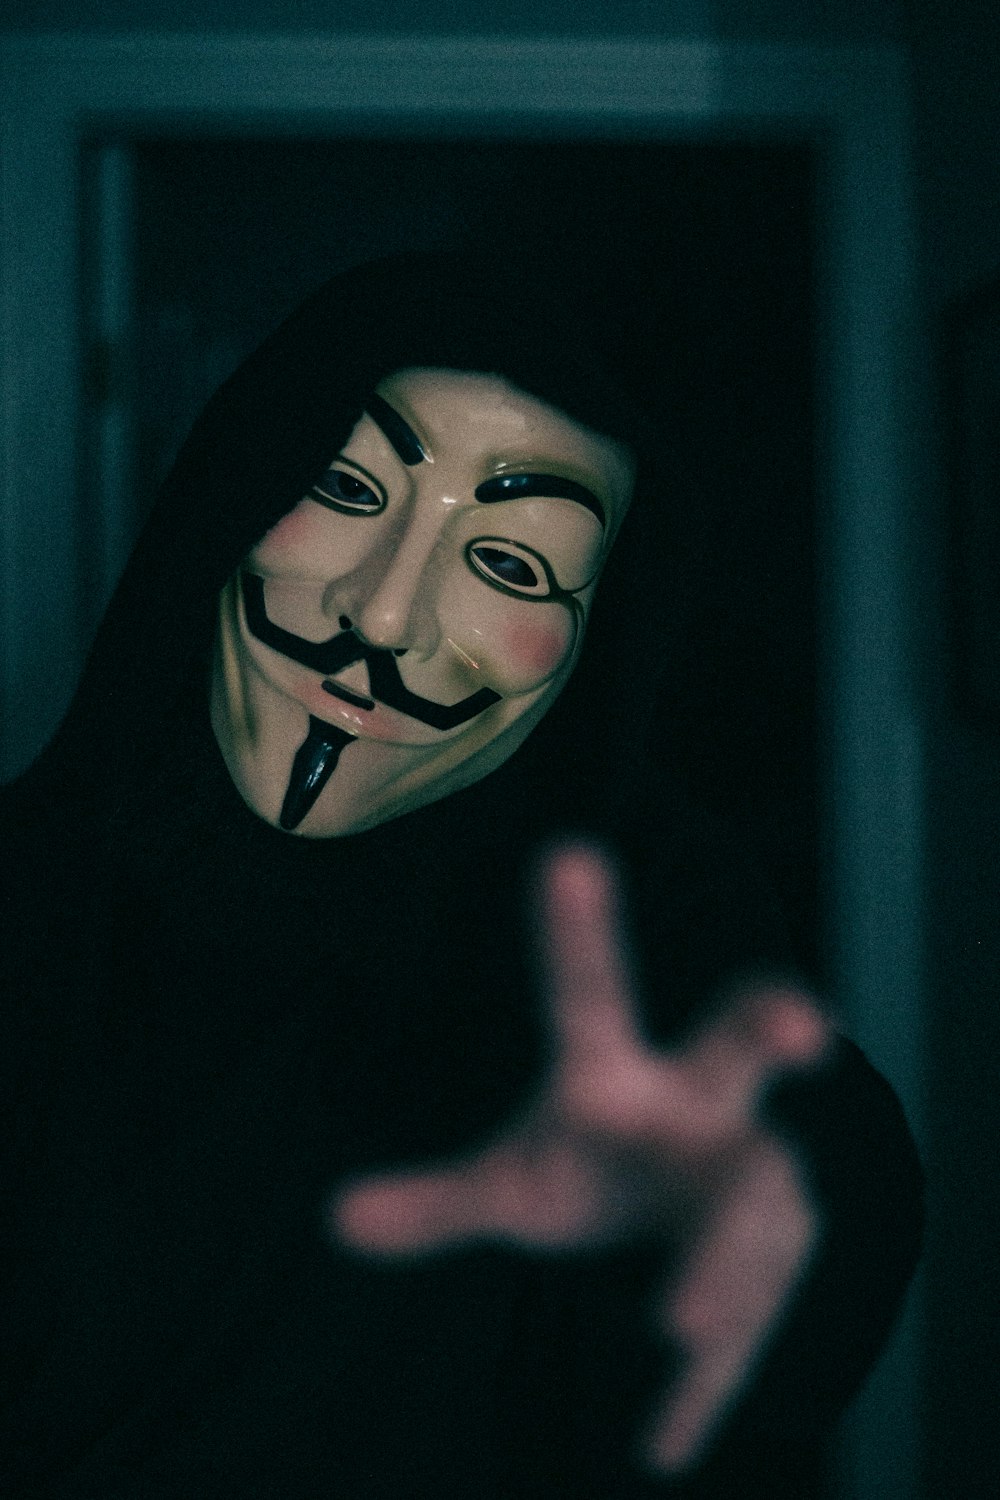 a person wearing a mask making a hand gesture